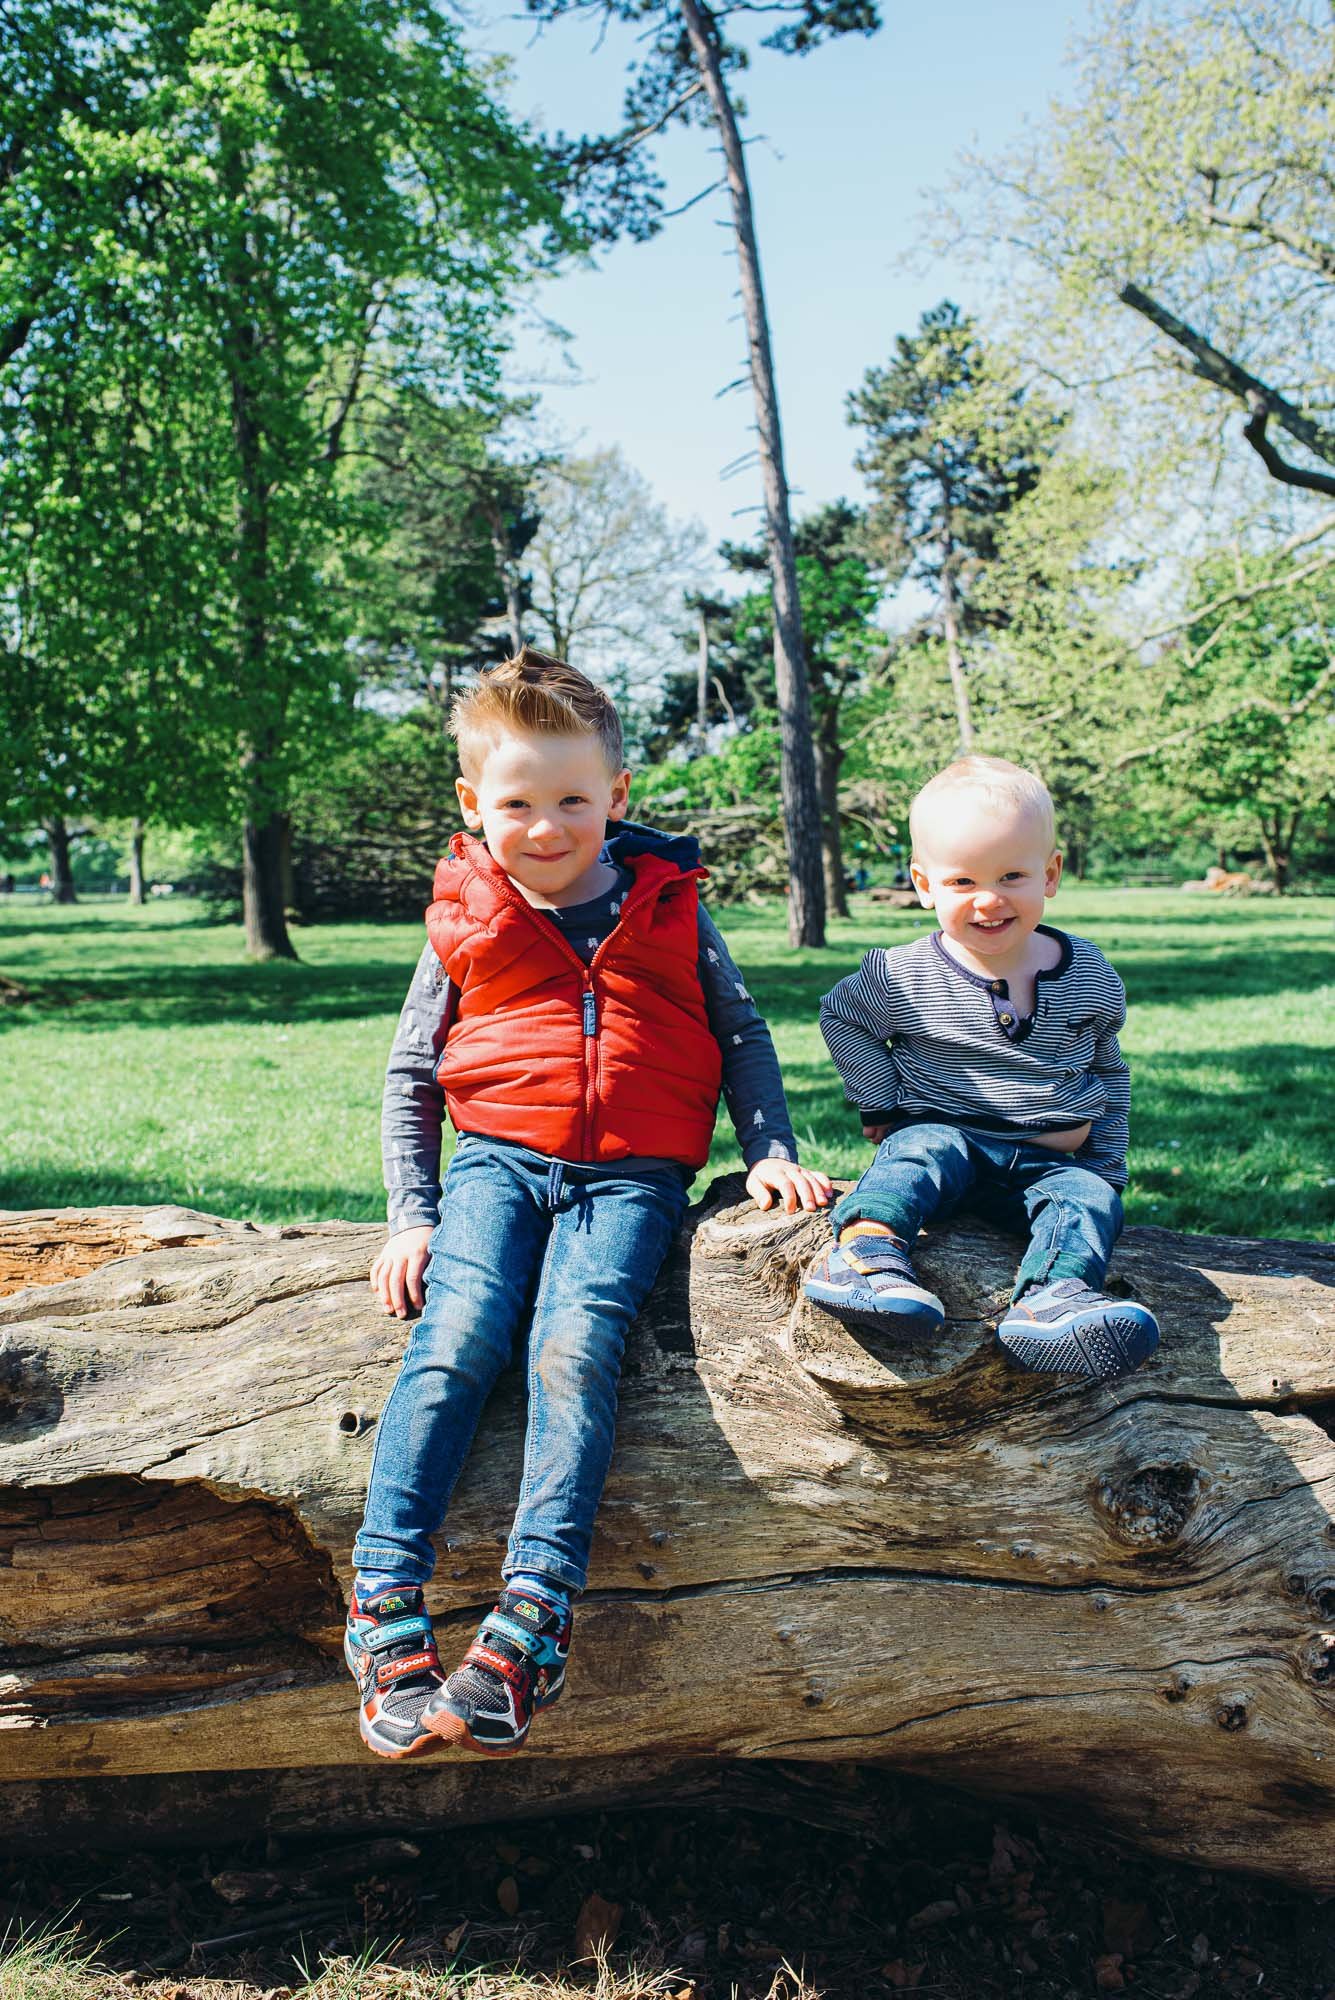 brothers-siblings-portrait-outdoor-family-photoshoot-dulwich-london-children-newborn-family-photographer-south-london.jpg